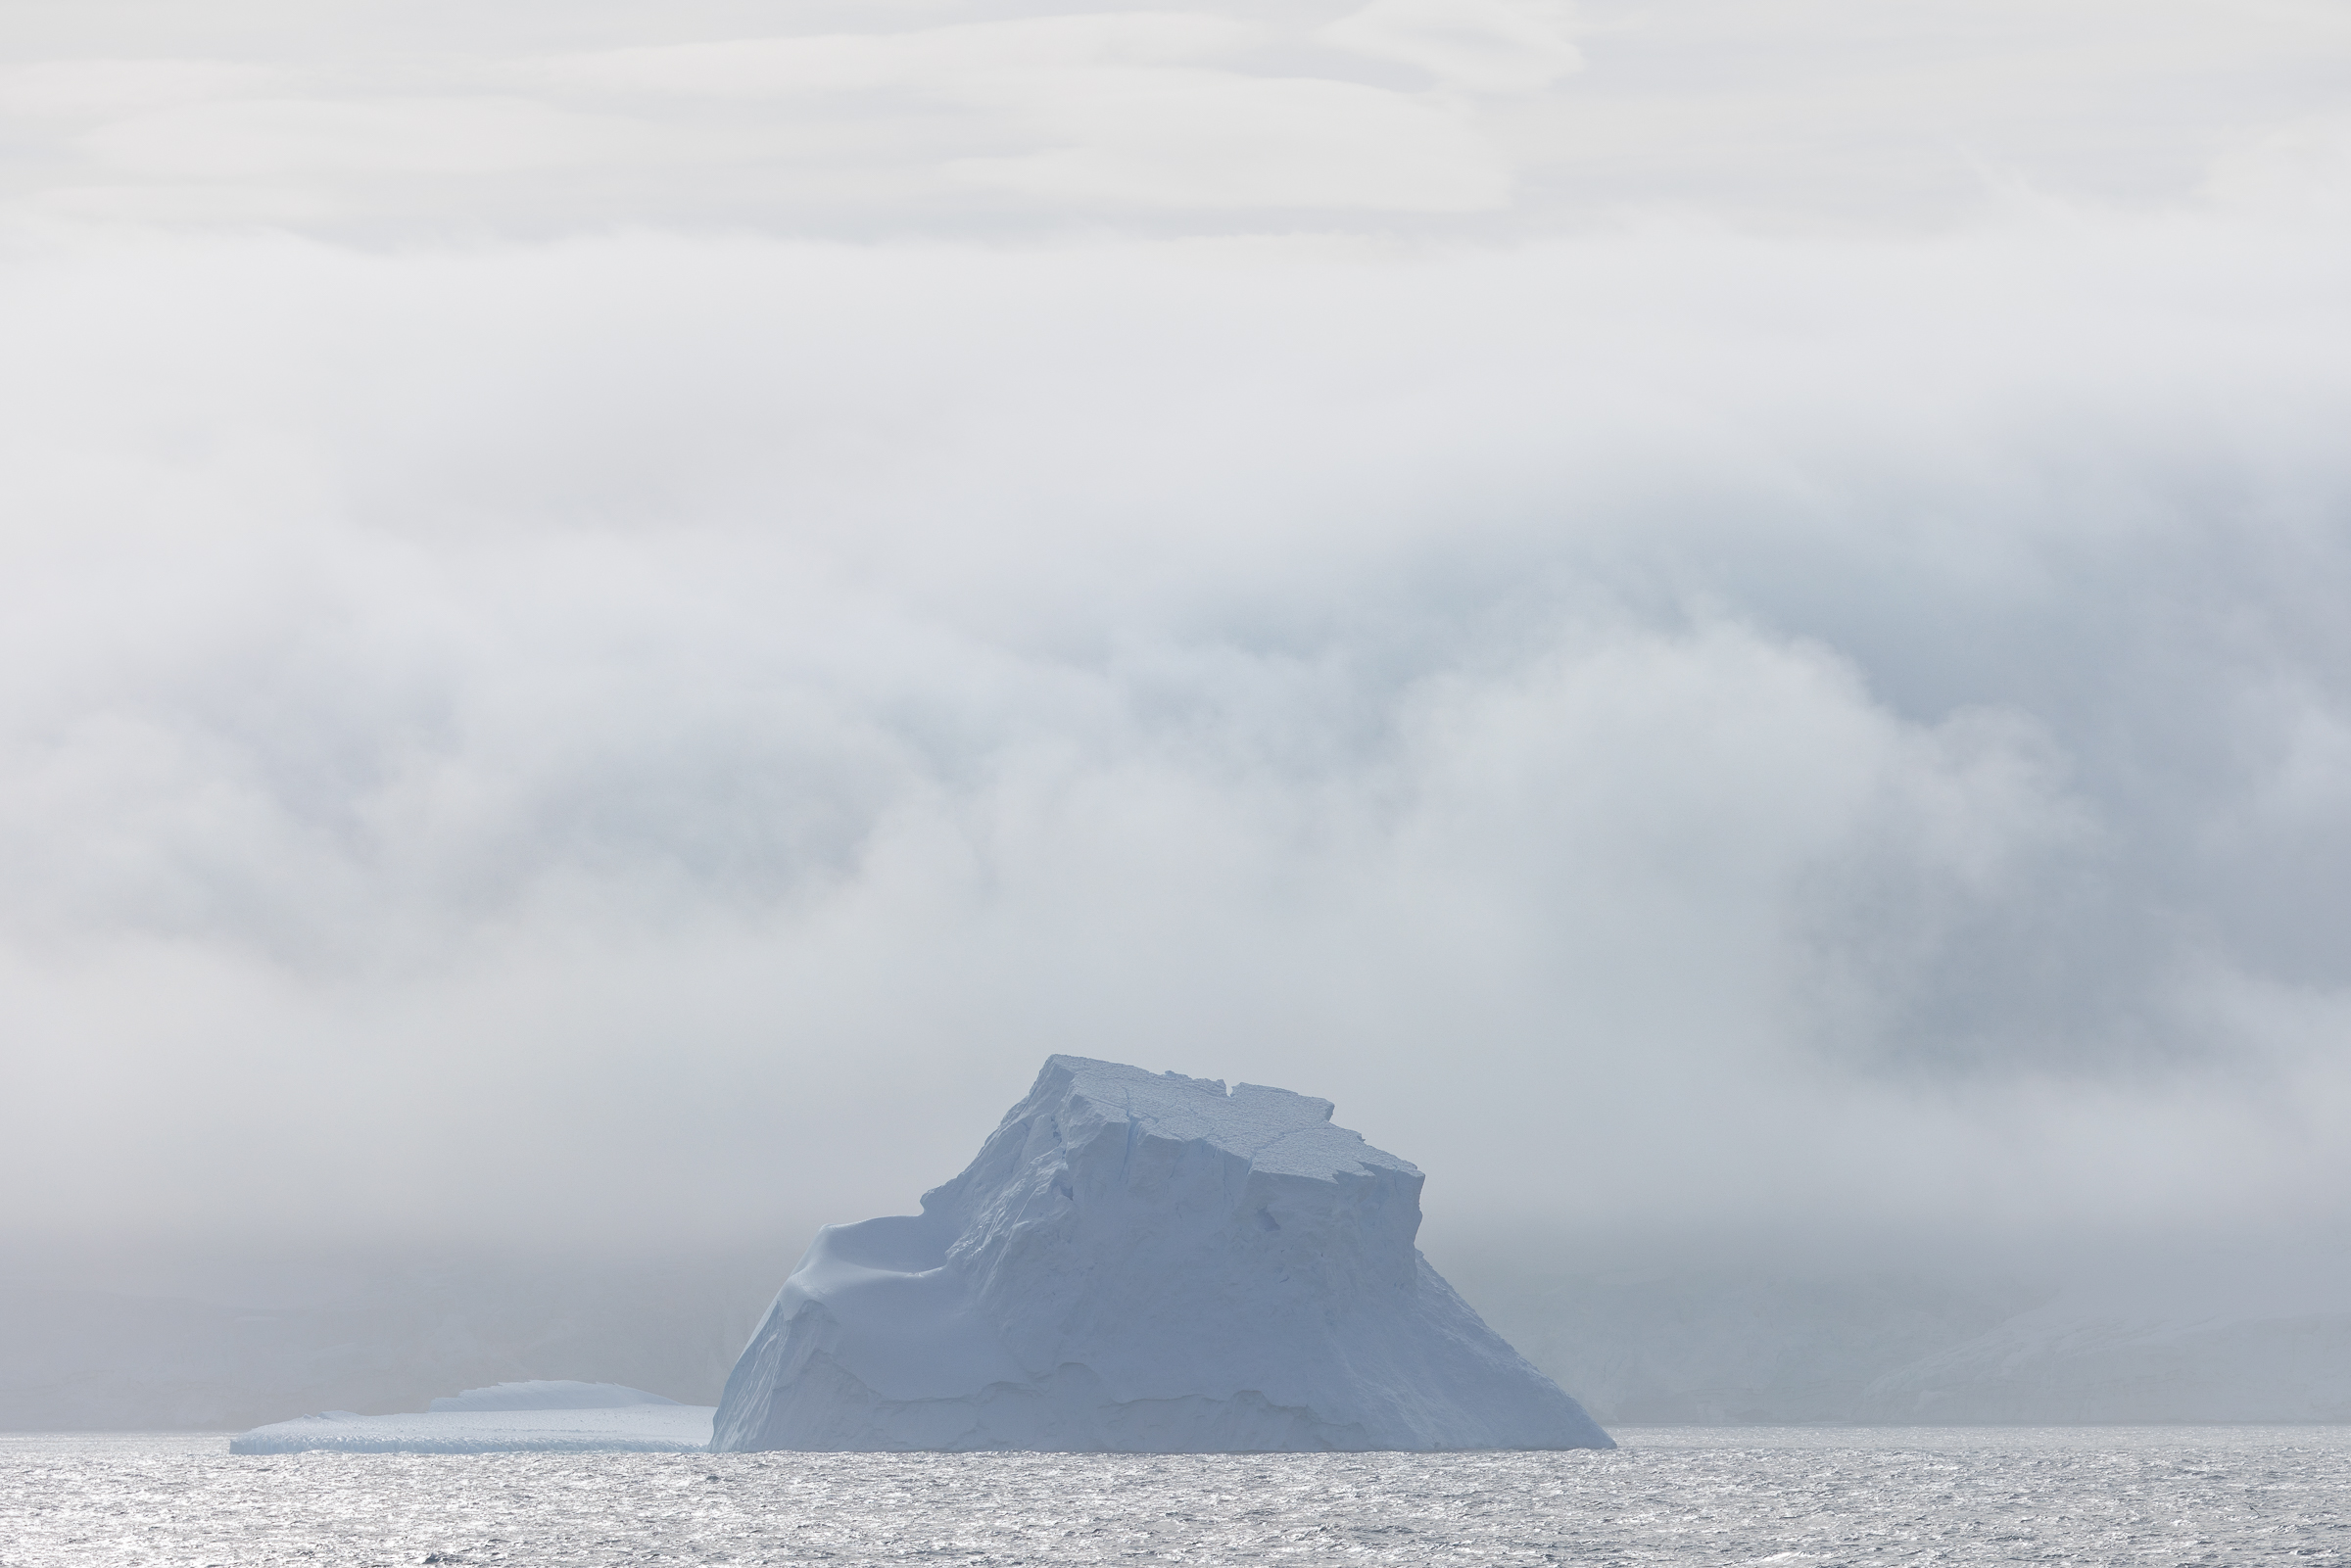 The last icebergs after leaving the South Shetland Islands.